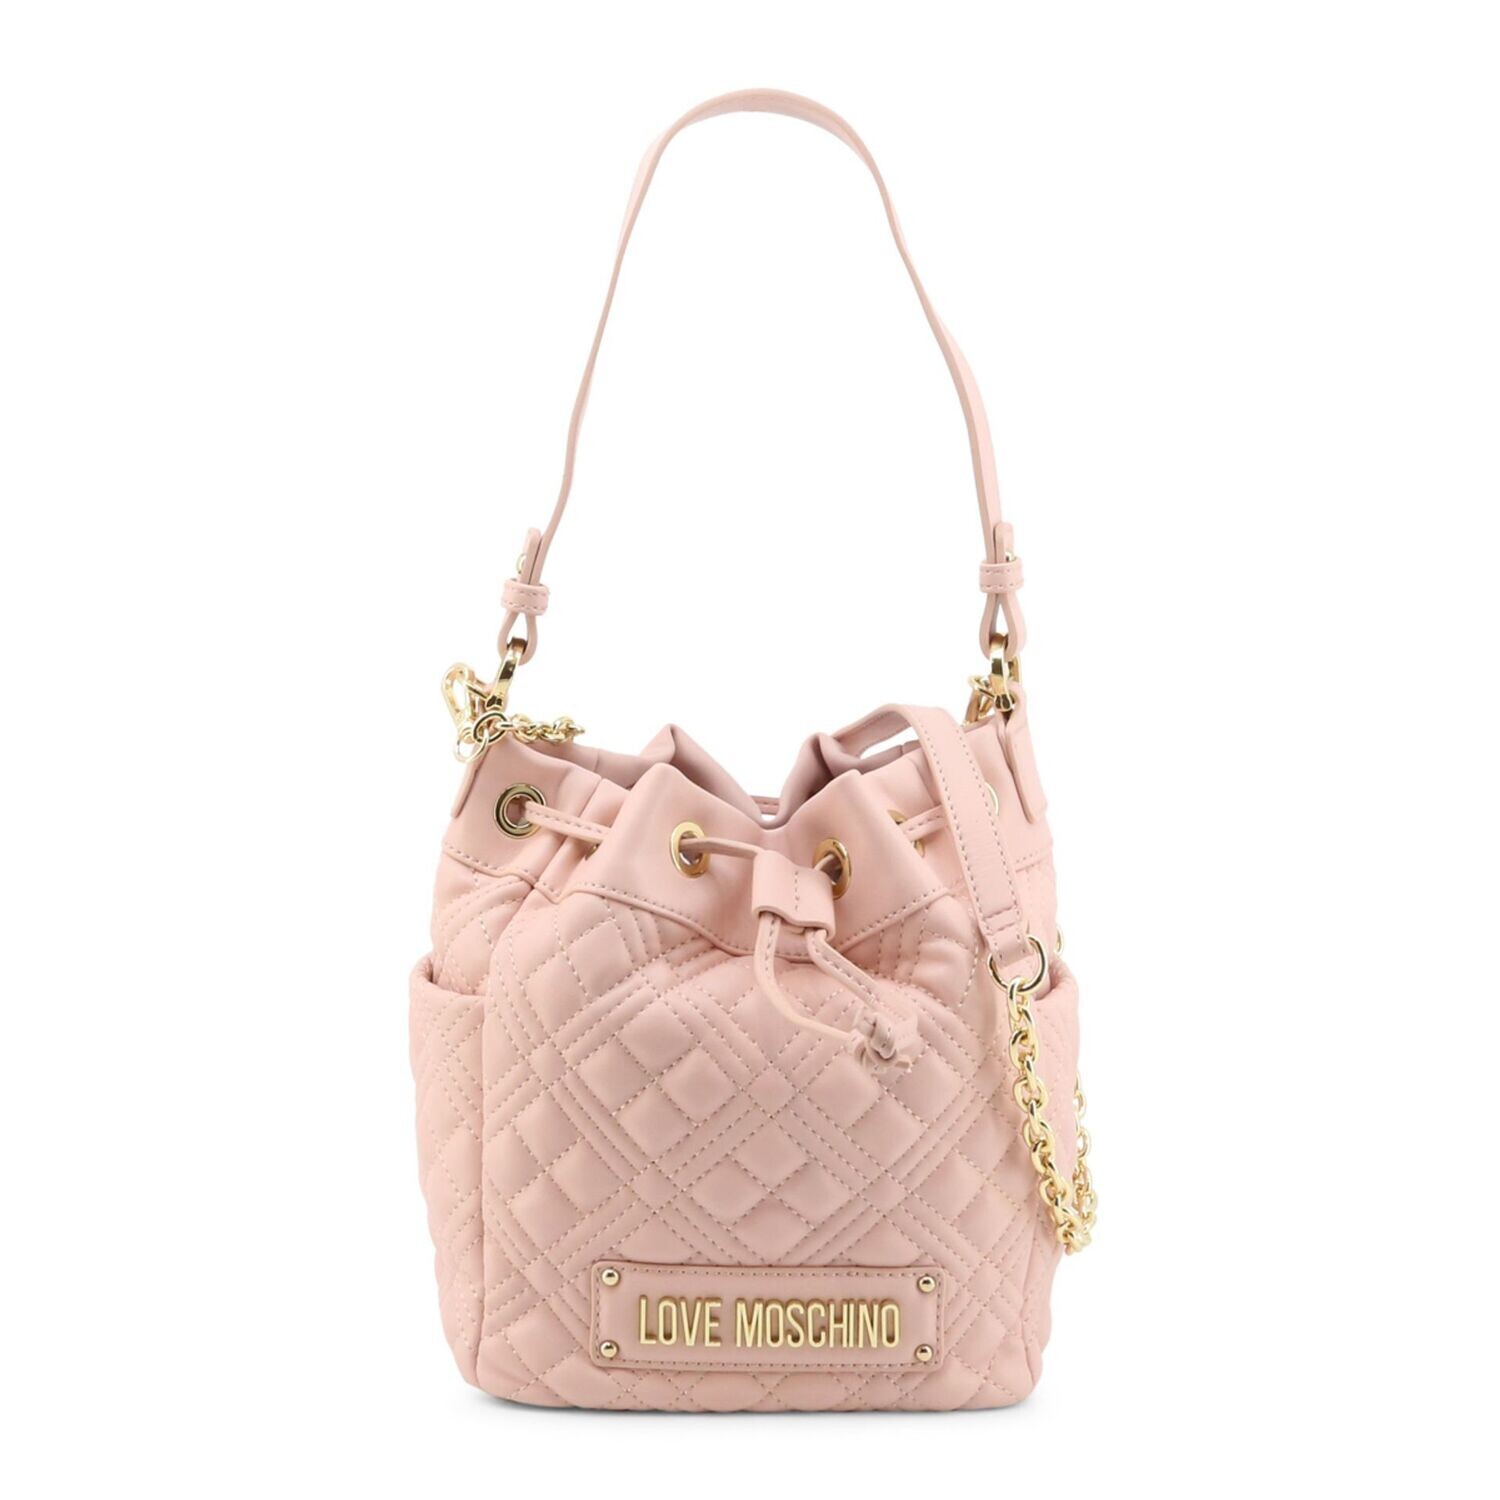 Love Moschino Classic Pink Shoulder Bag